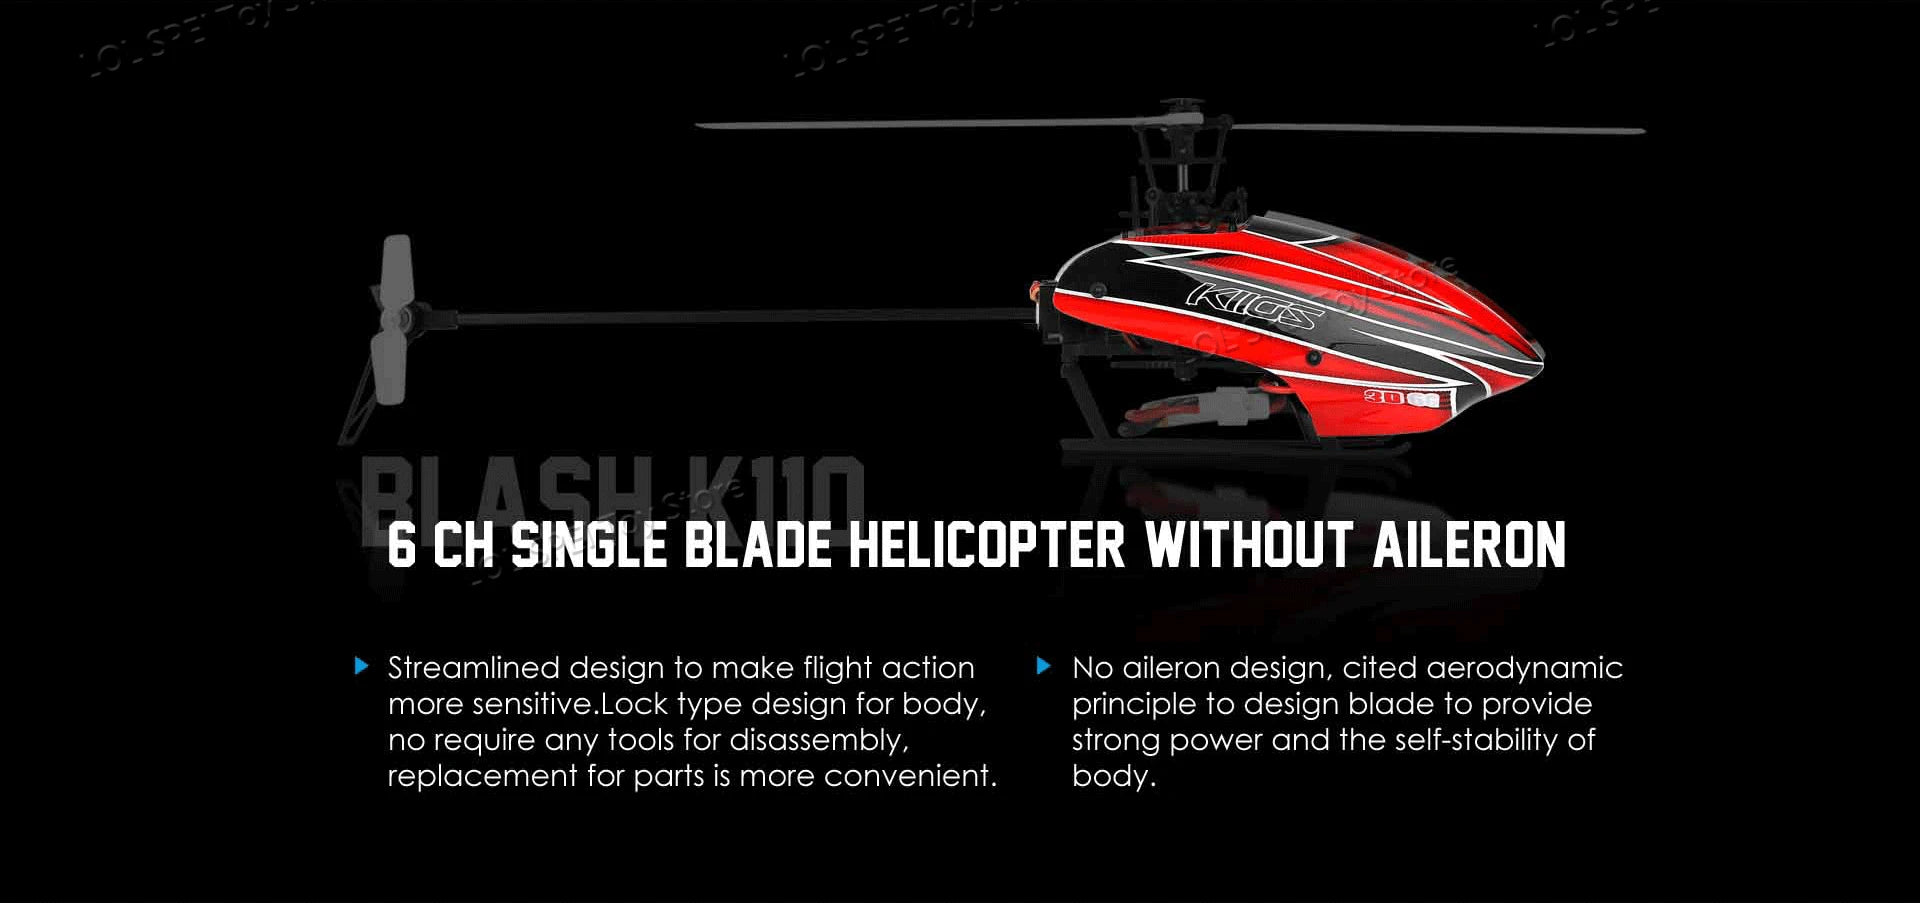 Wltoys XK K110s RC Helicopter, no aileron design, cited aerodynamic more sensitive . blade to provide